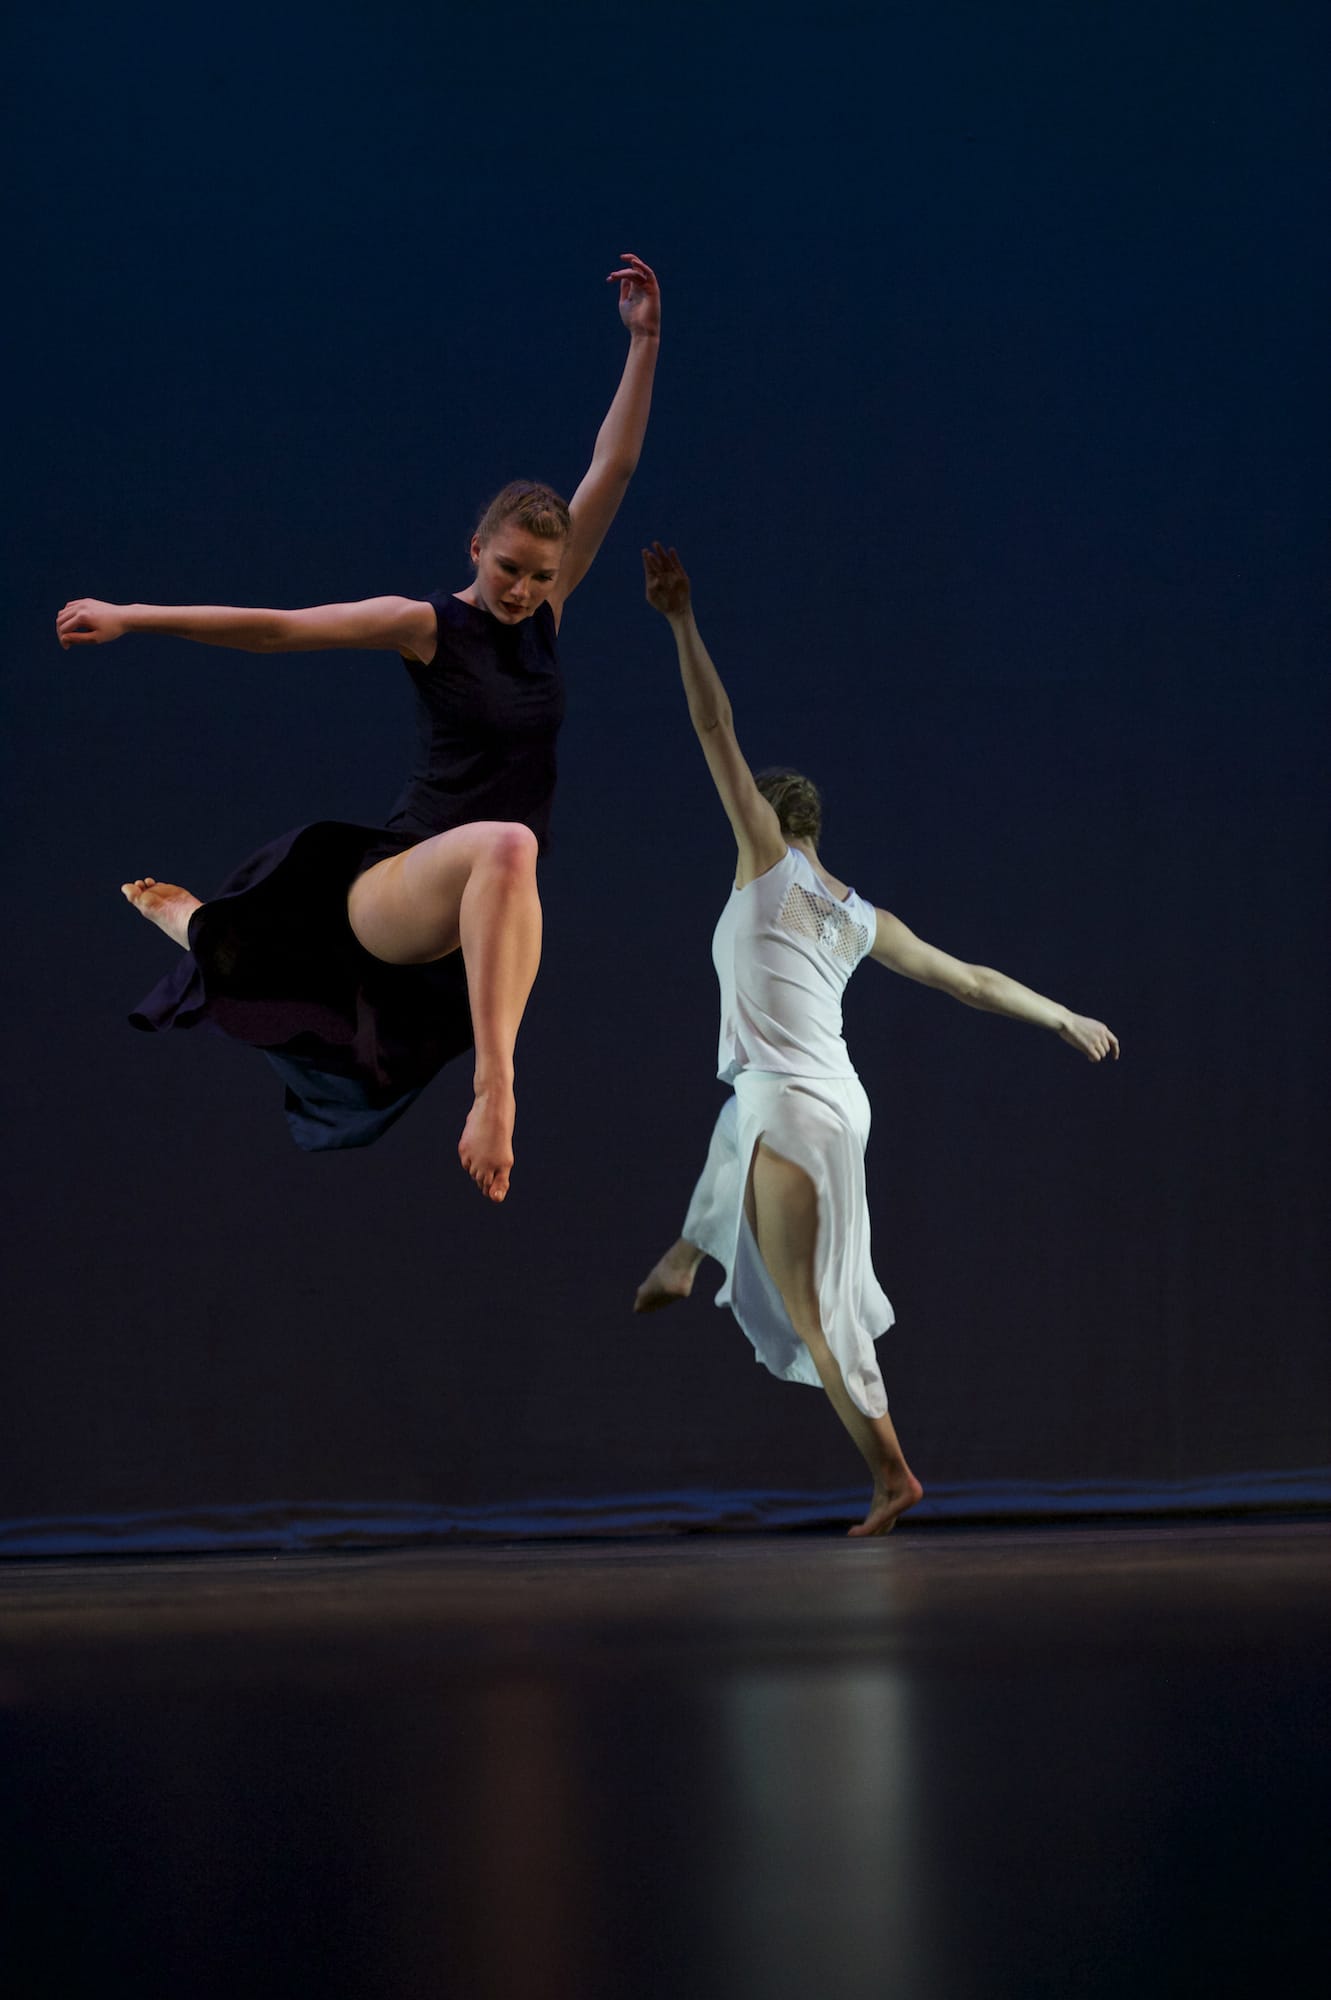 &quot;Columbia Dance Presents!&quot; features multiple dance performances by the Columbia Dance Company, March 22-23 at the Royal Durst Theater in Vancouver.